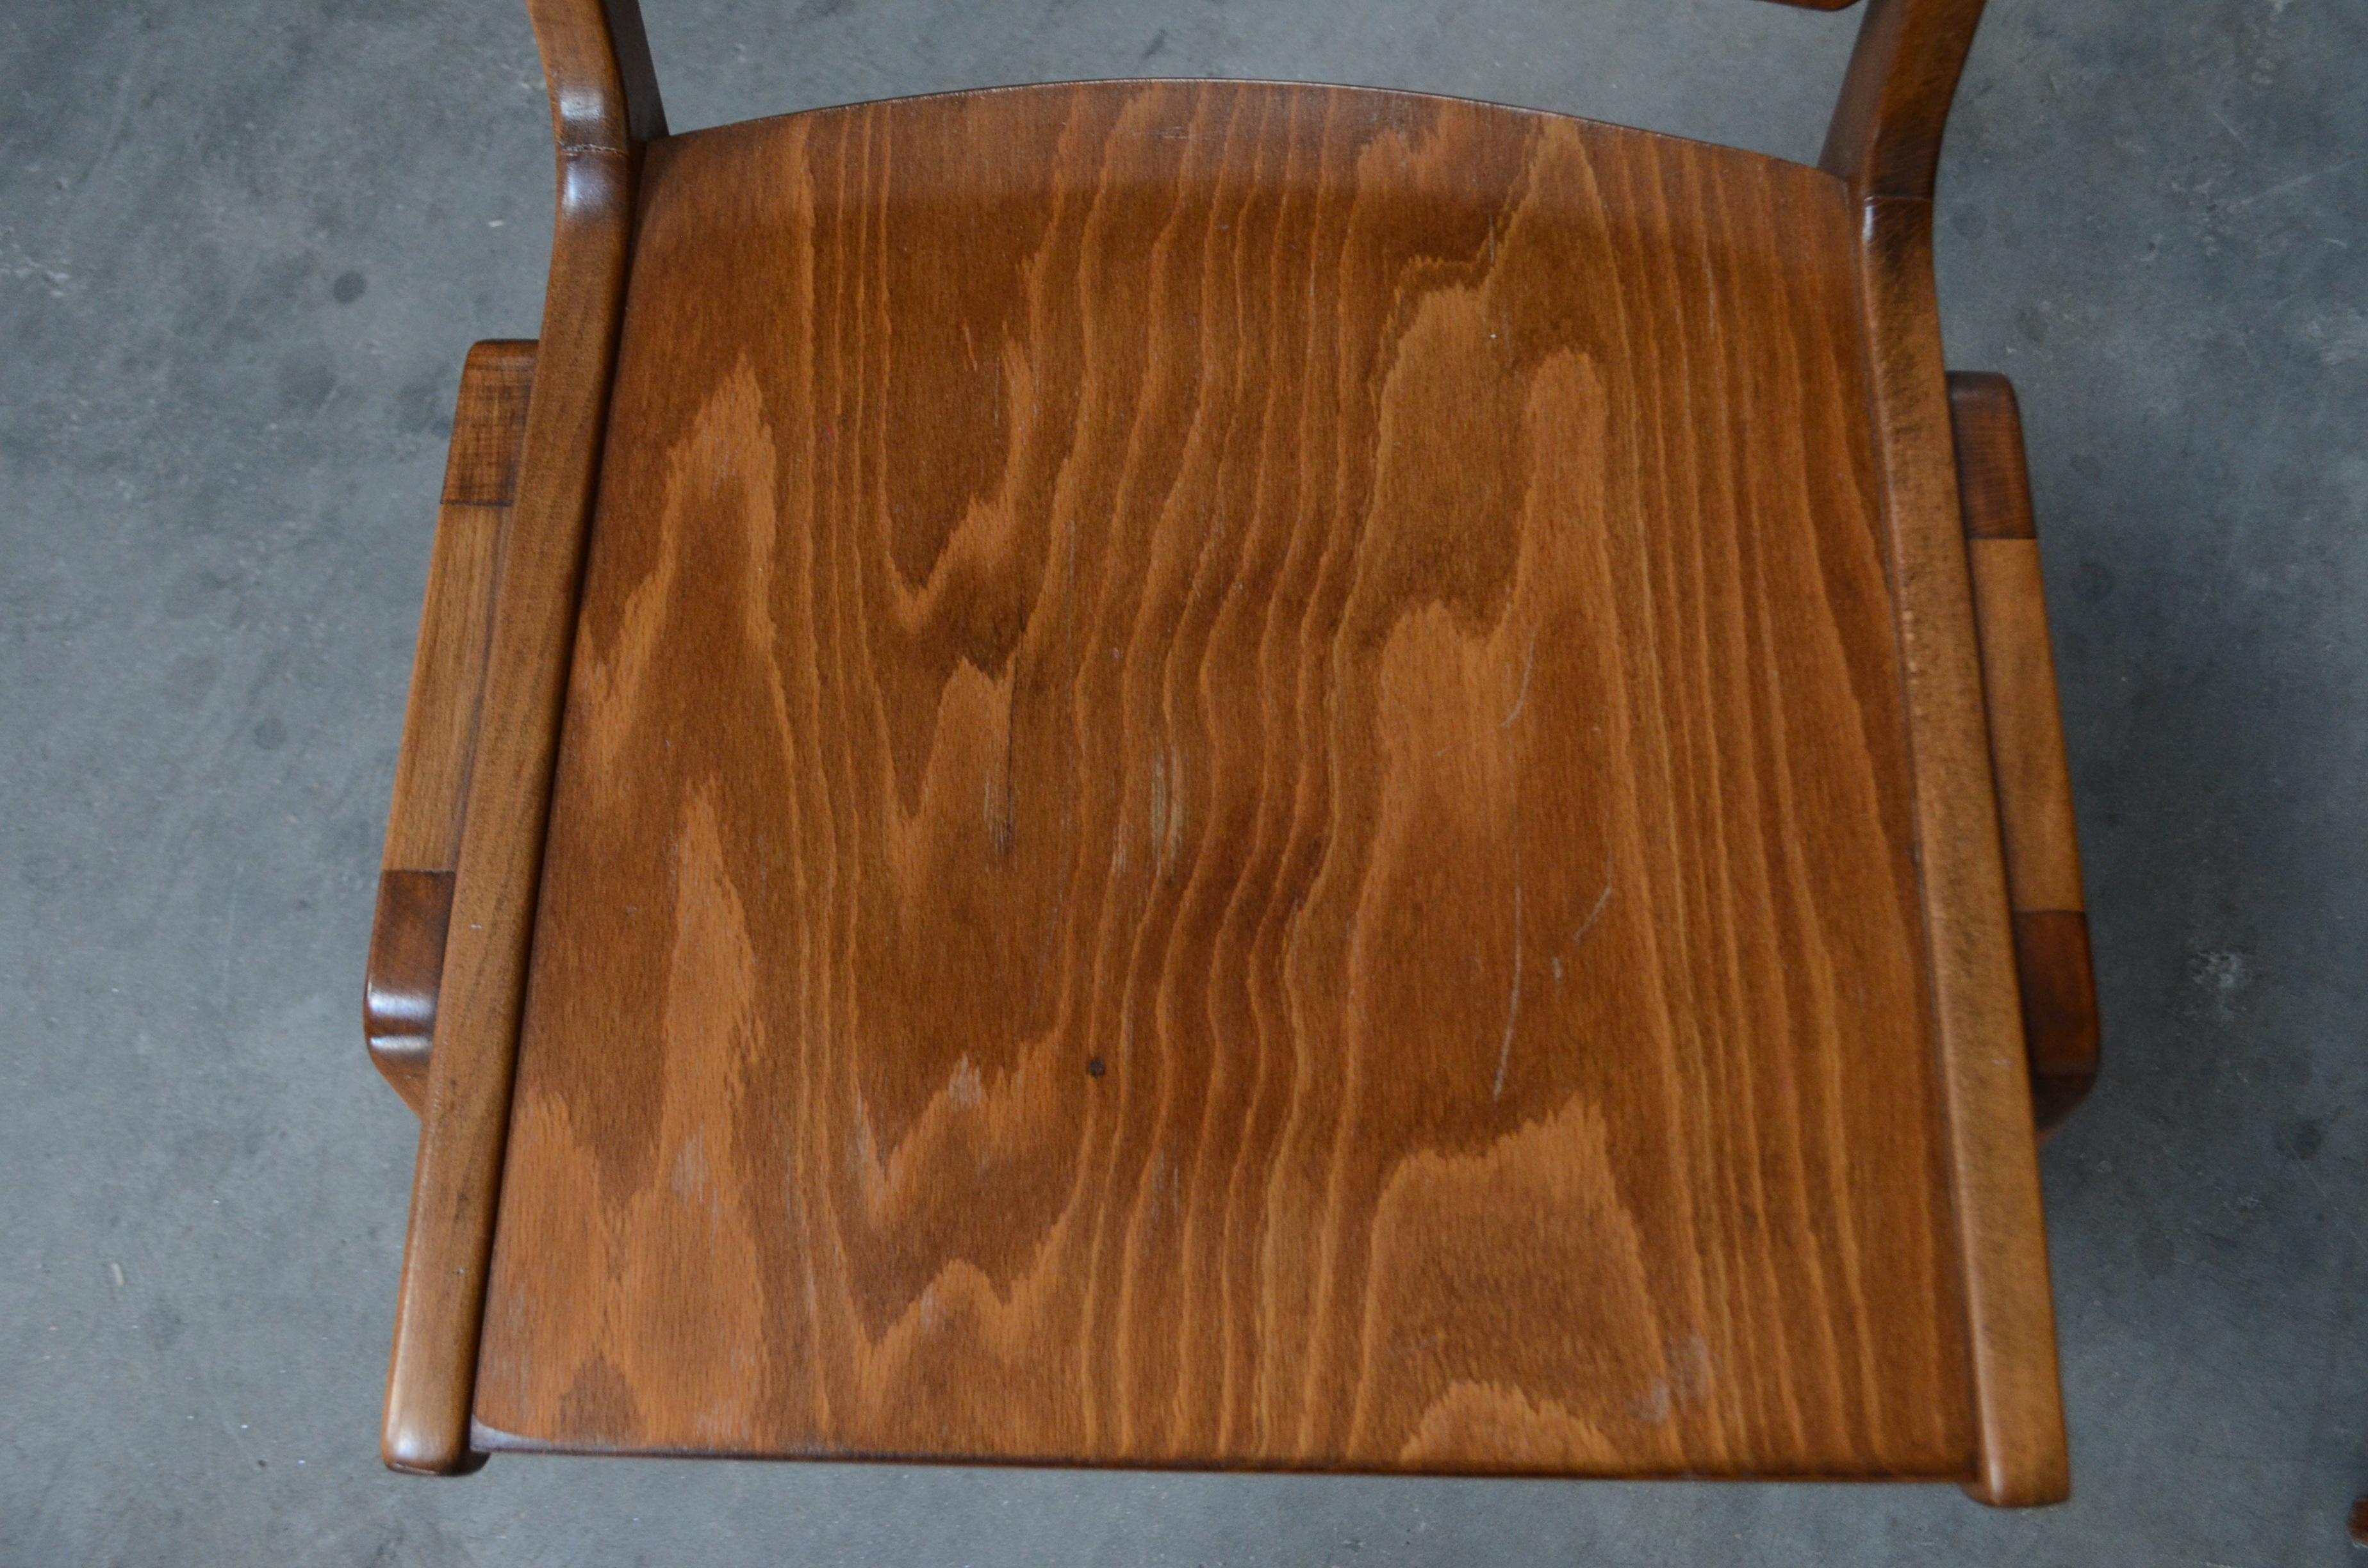 8 Set of Original Austro Chairs by Franz Schuster for Wiesner Hager Austria 1959 For Sale 6